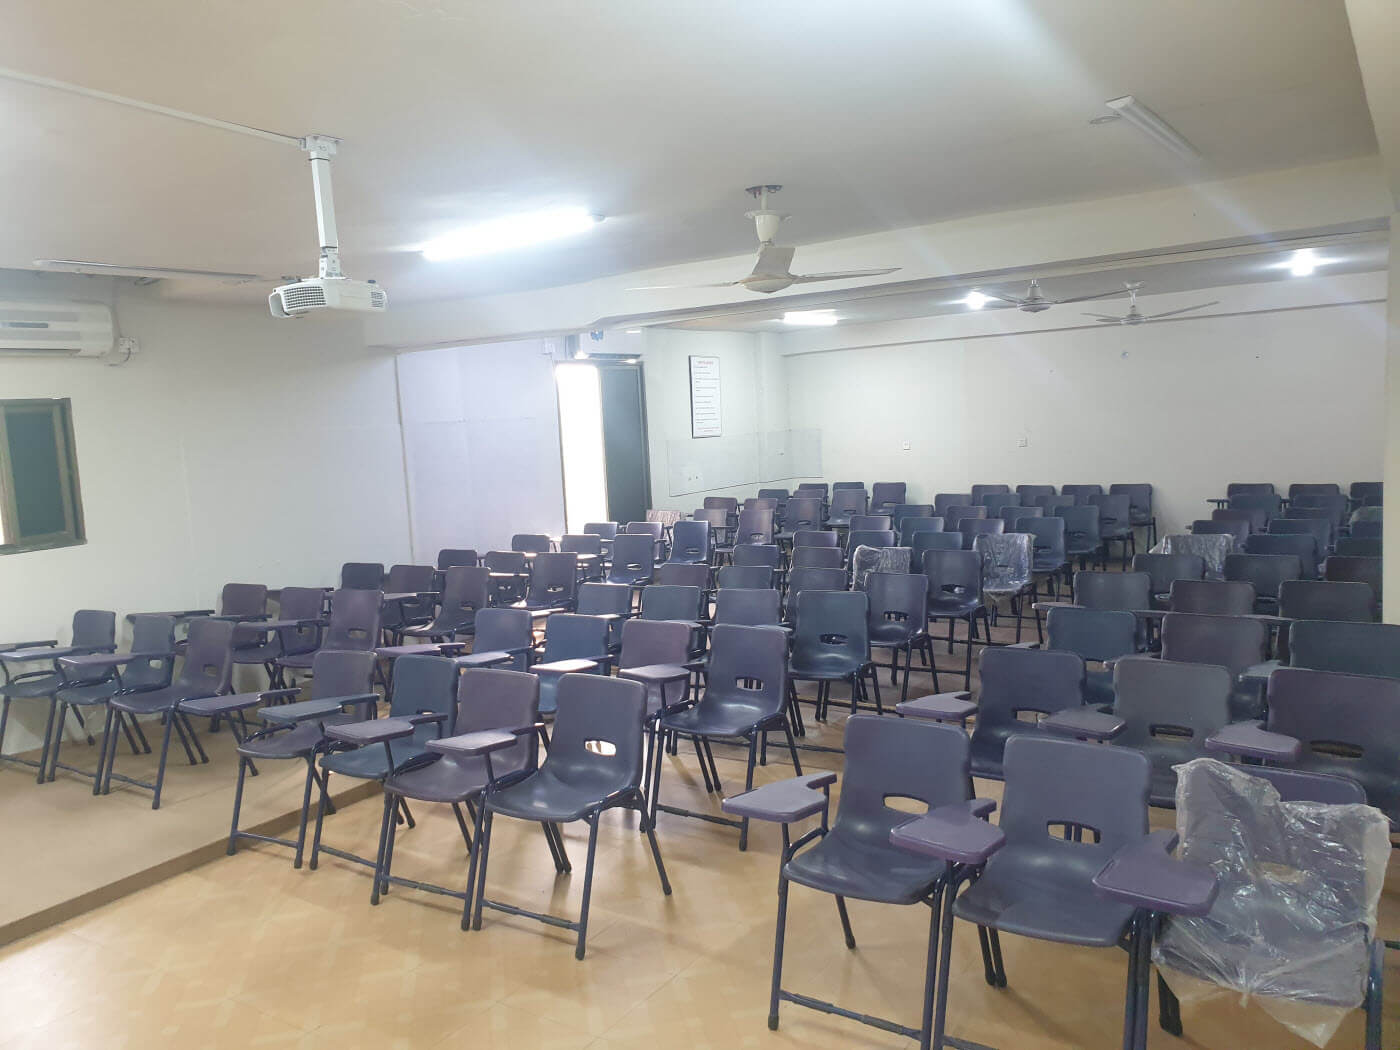 Lecture Halls 21